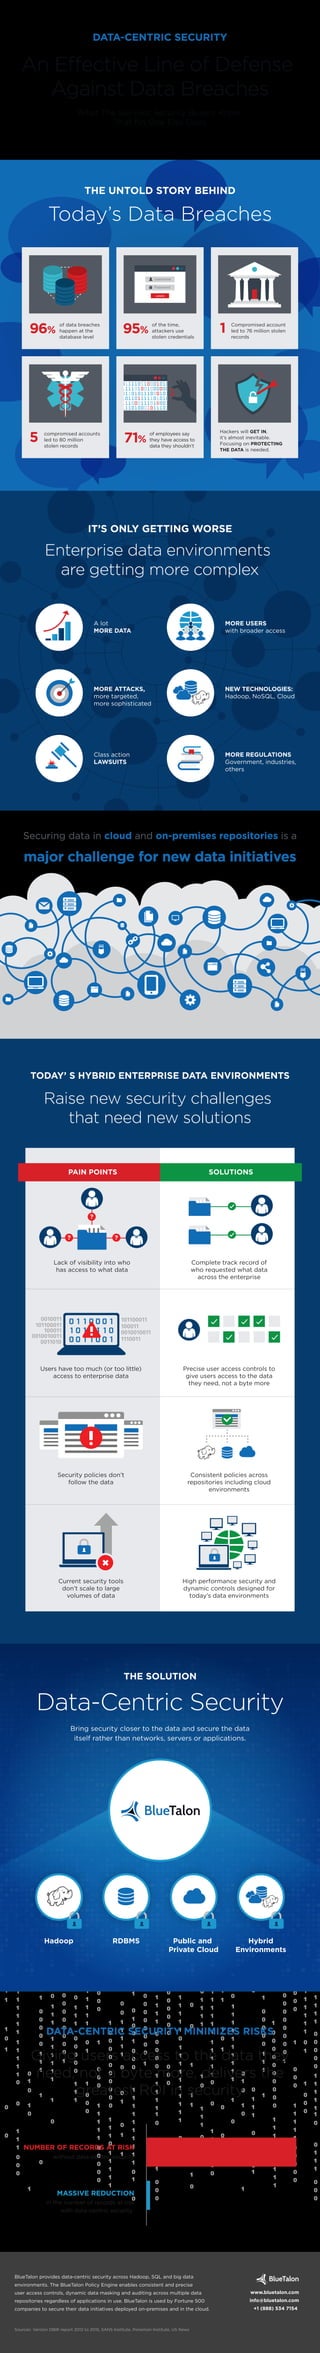 THE SOLUTION
Bring security closer to the data and secure the data
itself rather than networks, servers or applications.
TODAY’ S HYBRID ENTERPRISE DATA ENVIRONMENTS
Raise new security challenges
that need new solutions
Data-Centric Security
DATA-CENTRIC SECURITY
An Effective Line of Defense
Against Data Breaches
What The Savviest Security Buyers Know
That No One Else Does
DATA-CENTRIC SECURITY MINIMIZES RISKS
BlueTalon provides data-centric security across Hadoop, SQL and big data
environments. The BlueTalon Policy Engine enables consistent and precise
user access controls, dynamic data masking and auditing across multiple data
repositories regardless of applications in use. BlueTalon is used by Fortune 500
companies to secure their data initiatives deployed on-premises and in the cloud.
Sources: Verizon DBIR report 2012 to 2015, SANS Institute, Ponemon Institute, US News
www.bluetalon.com
info@bluetalon.com
+1 (888) 534 7154
IT’S ONLY GETTING WORSE
Enterprise data environments
are getting more complex
Class action
LAWSUITS
MORE REGULATIONS
Government, industries,
others
MORE ATTACKS,
more targeted,
more sophisticated
NEW TECHNOLOGIES:
Hadoop, NoSQL, Cloud
A lot
MORE DATA
MORE USERS
with broader access
SOLUTIONSPAIN POINTS
RDBMS Public and
Private Cloud
Hybrid
Environments
Hadoop
Precise user access controls to
give users access to the data
they need, not a byte more
Consistent policies across
repositories including cloud
environments
High performance security and
dynamic controls designed for
today’s data environments
Complete track record of
who requested what data
across the enterprise
Users have too much (or too little)
access to enterprise data
Security policies don’t
follow the data
Current security tools
don’t scale to large
volumes of data
Lack of visibility into who
has access to what data
MASSIVE REDUCTION
NUMBER OF RECORDS AT RISK
?
? ?
in the number of records at risk
with data-centric security
without data-centric security
Giving users access to the data they
need, not a byte more, delivers the
greatest ROI in security
Securing data in cloud and on-premises repositories is a
major challenge for new data initiatives
THE UNTOLD STORY BEHIND
Today’s Data Breaches
of data breaches
happen at the
database level
96%
of the time,
attackers use
stolen credentials
Compromised account
led to 76 million stolen
records
1
compromised accounts
led to 80 million
stolen records
5 of employees say
they have access to
data they shouldn’t
71%
Hackers will GET IN,
it’s almost inevitable.
Focusing on PROTECTING
THE DATA is needed.
LOGIN
95%
 